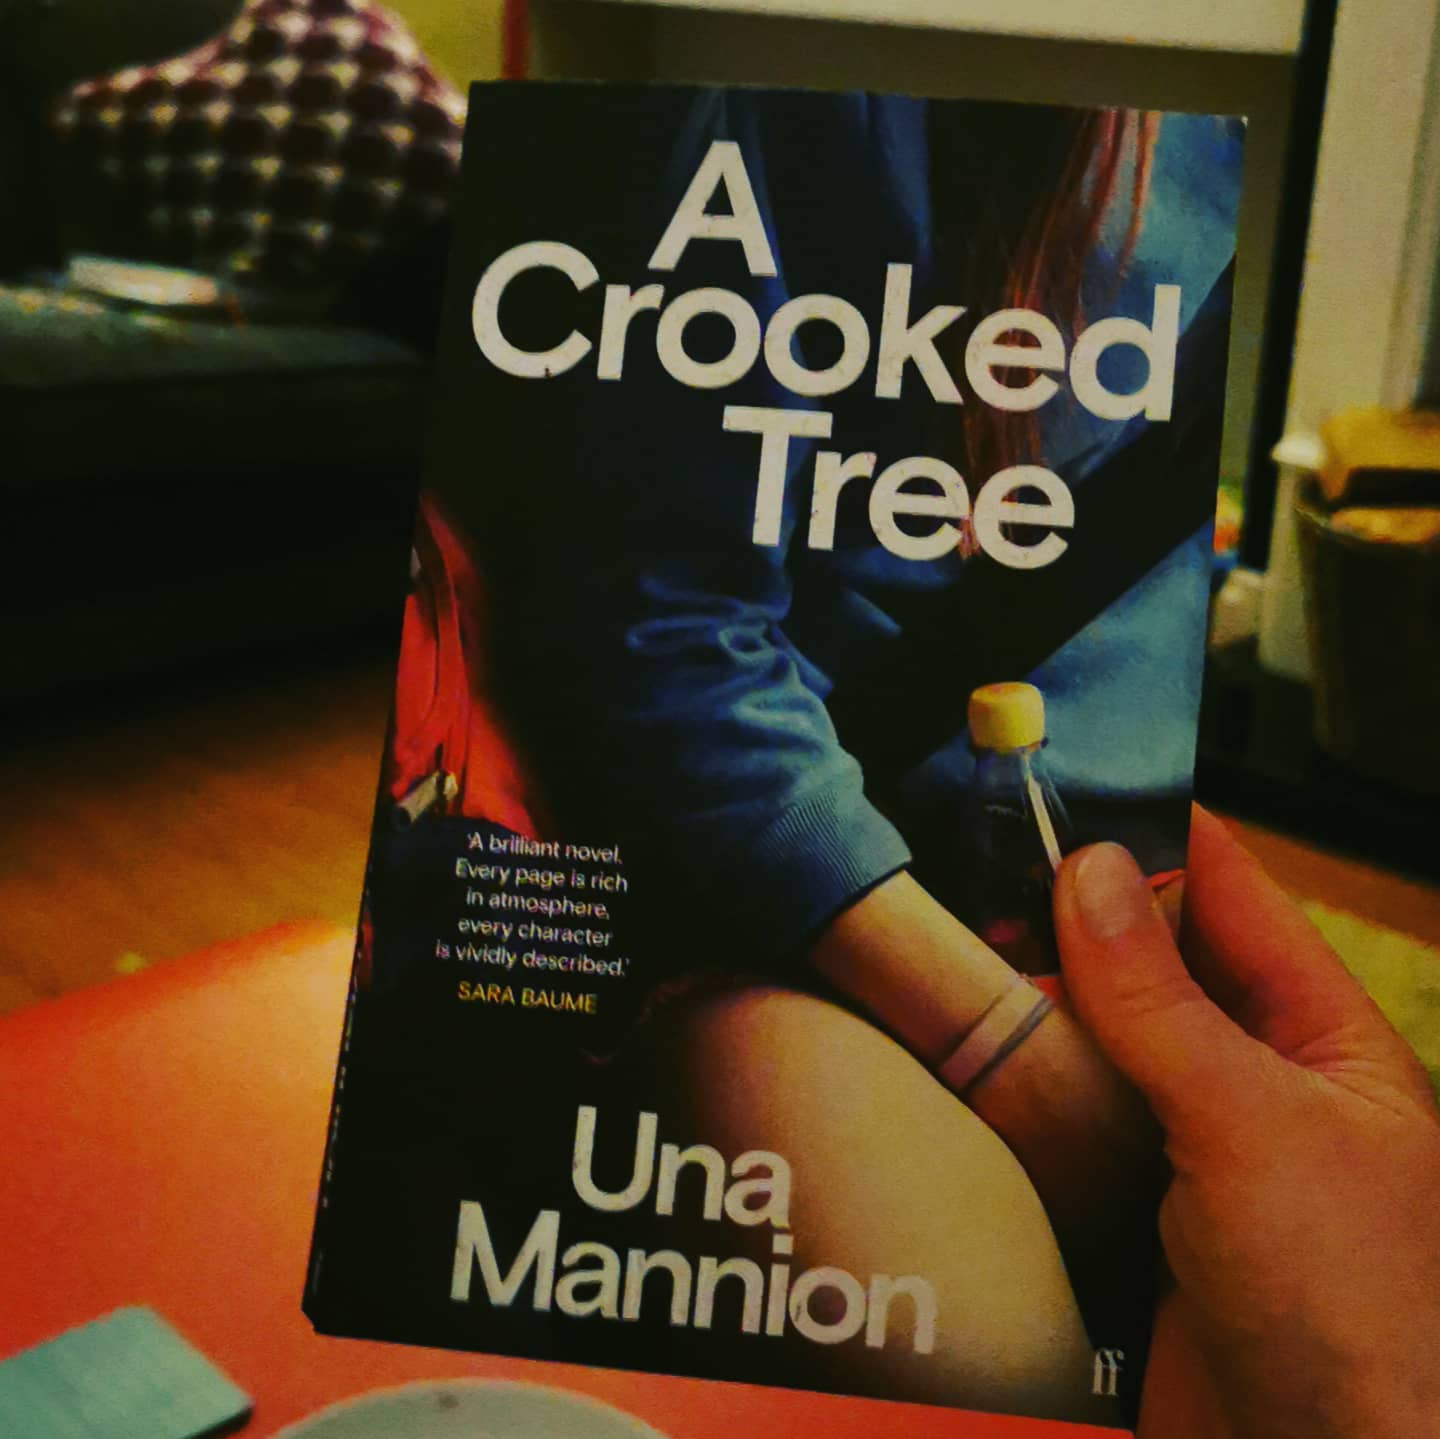 A Crooked Tree by Una Mannion.

I have always admired Una's short fiction so I was excited to get my hands on her debut novel.
It doesn't disappoint though it's a slow, slow start and it remains slow but by the time you get to end, you will enjoy that relaxed pace as it suits the story and the characters.

Libby is out for a drive at night with her siblings. Her mother is driving. We feel the tension but when Ellen, Libby's younger sister frustrates her frazzled mum, her mum basically dumps Ellen on the roadside and speeds off.
 
The story rocks on from this one awful decision and we learn about Libby and her connection with her father who has passed away.

This novel, set in an 80s rural Philadelphia, has all the feels of a  Goonies movie or an episode of Stranger Things. Una's writing never falters but I found the descriptions of nature and trees a little bit lengthy at times. It's clear she revels in writing about nature.

Overal, I found it to be a mesmerising read. Una's writing is carefully placed throughout and her plotting is excellent.